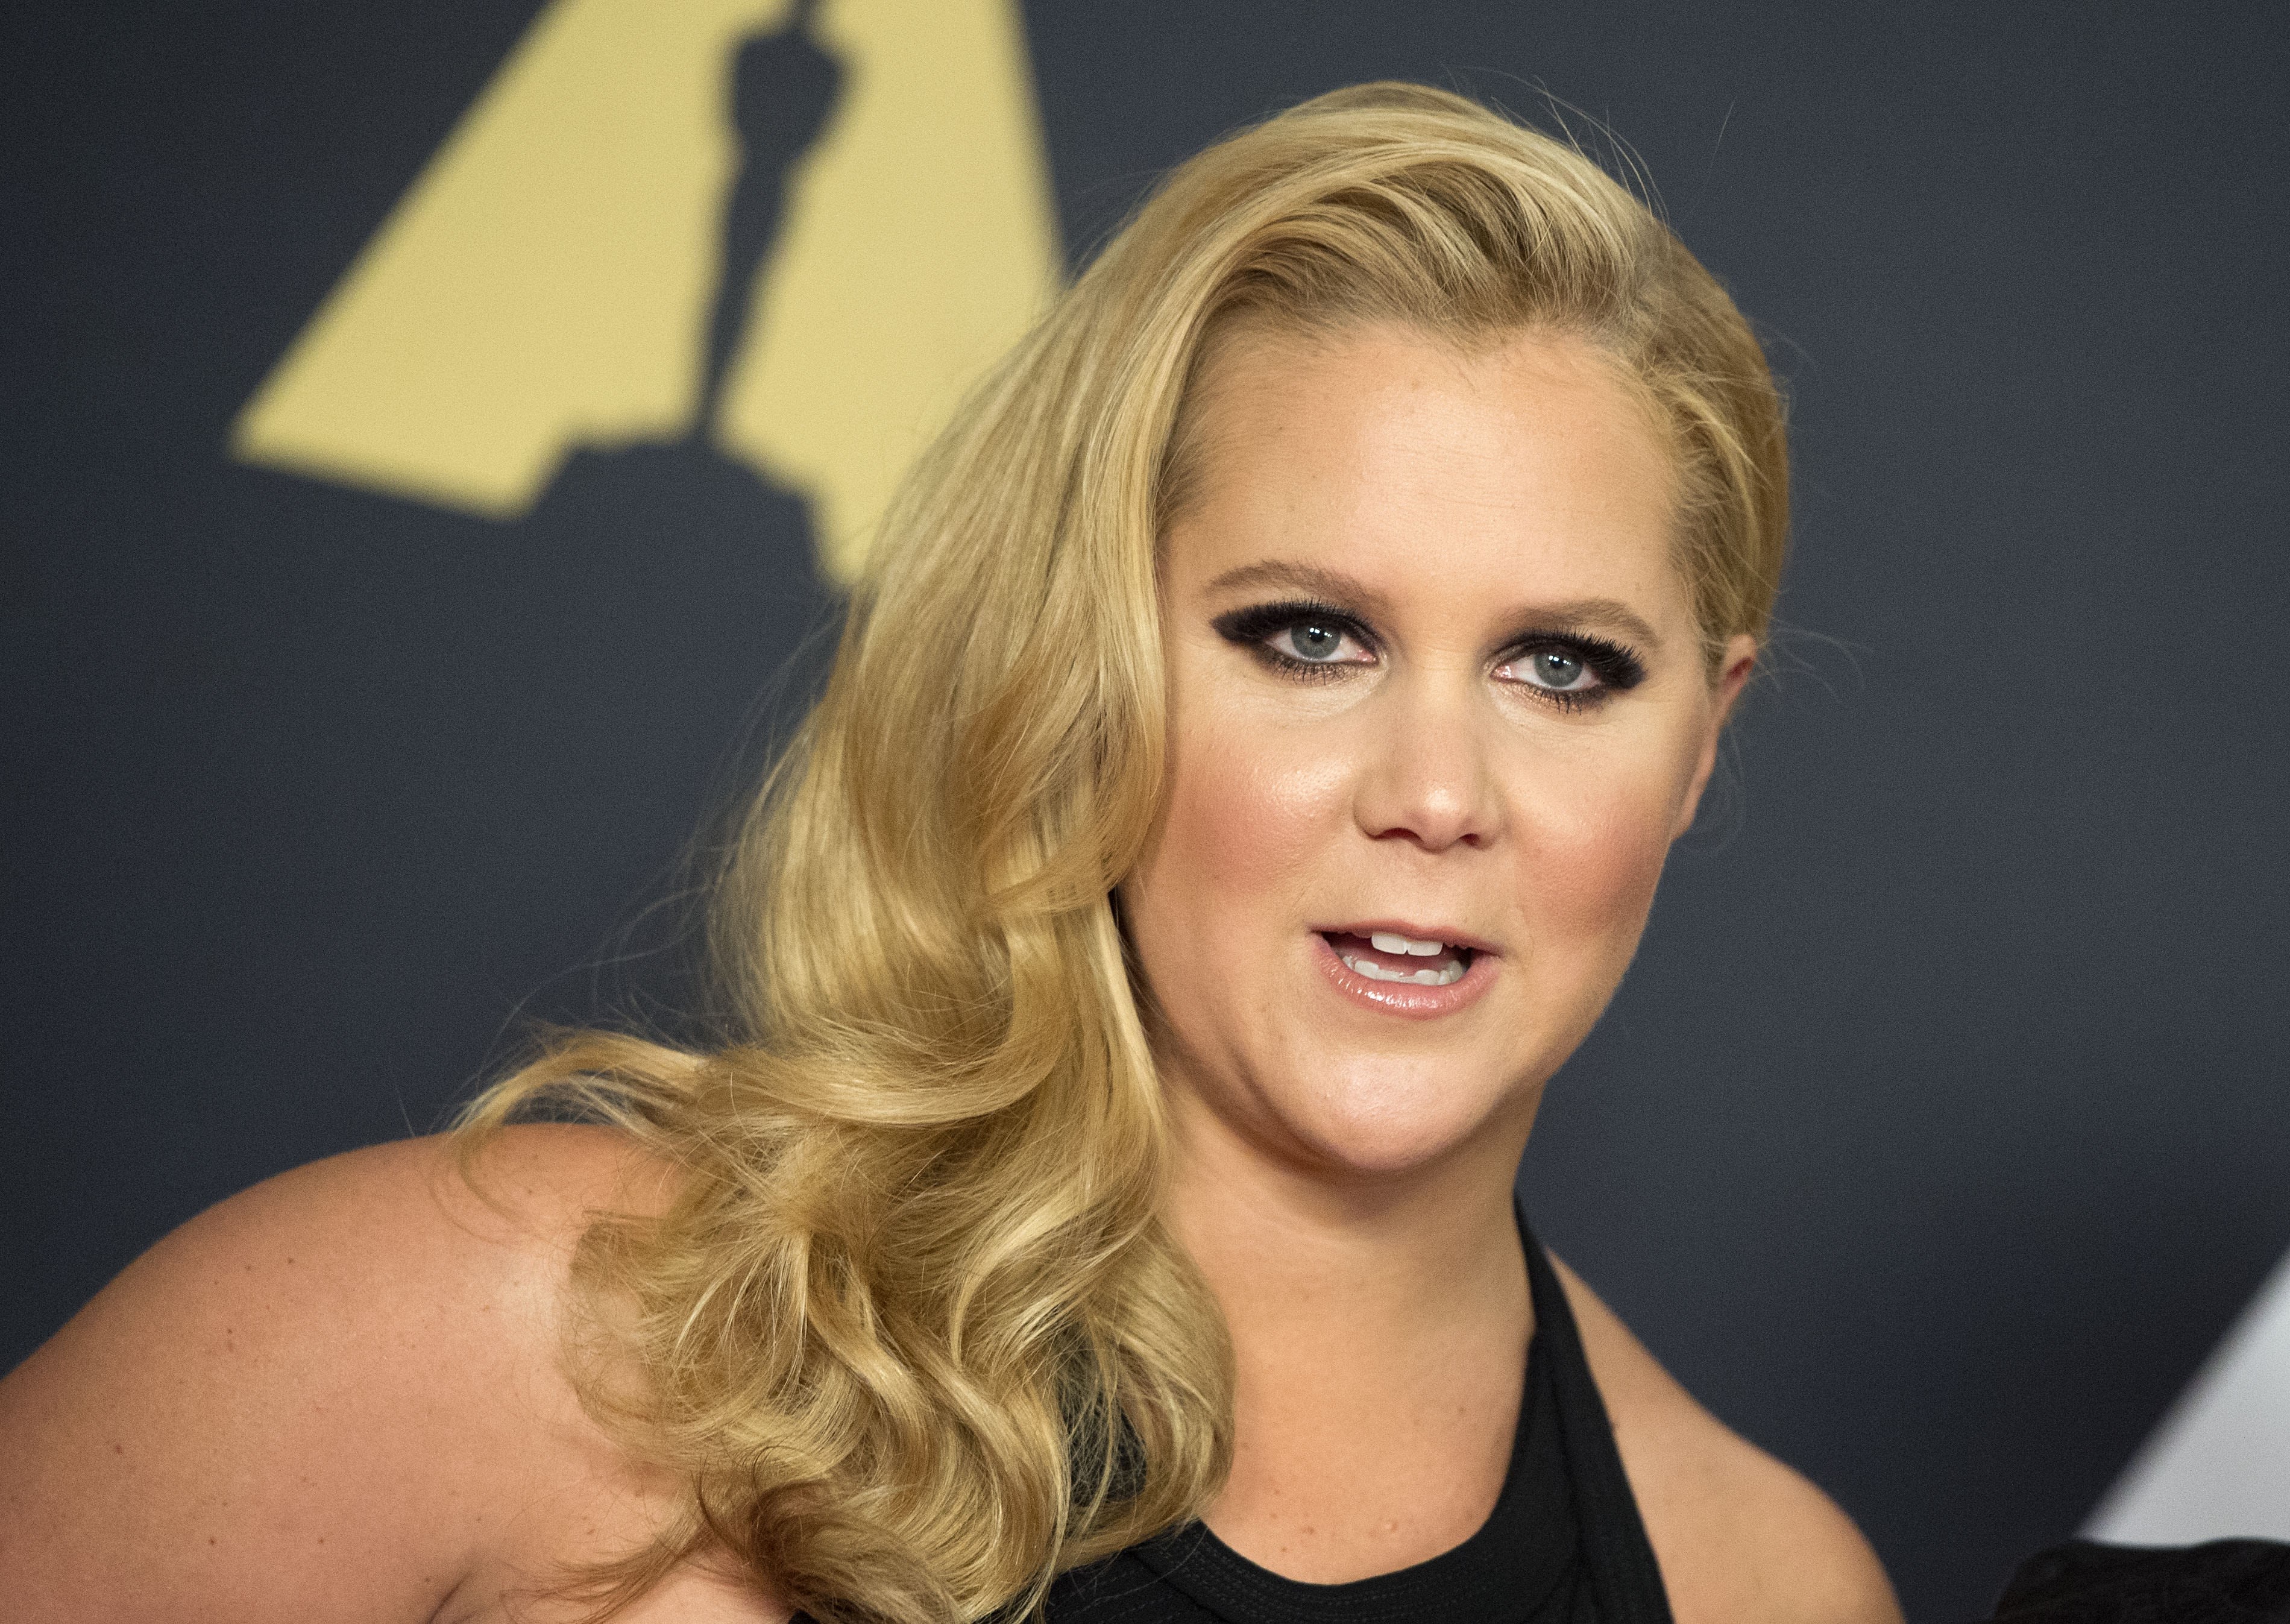 curt summers share amy schumer nud photos